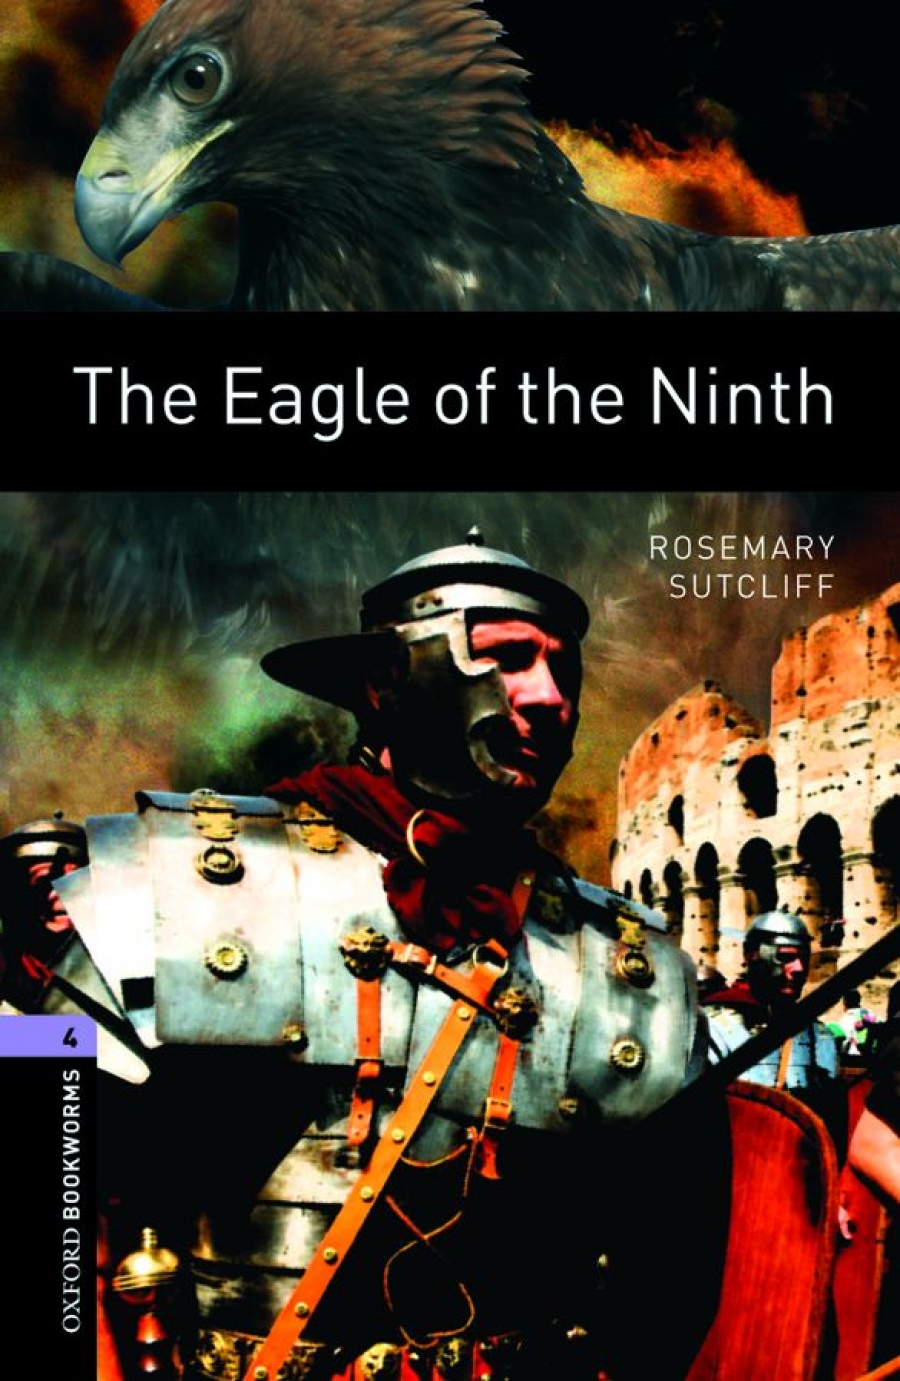 retold by John Escott, Rosemary Sutcliff OBL 4: The Eagle of the Ninth 